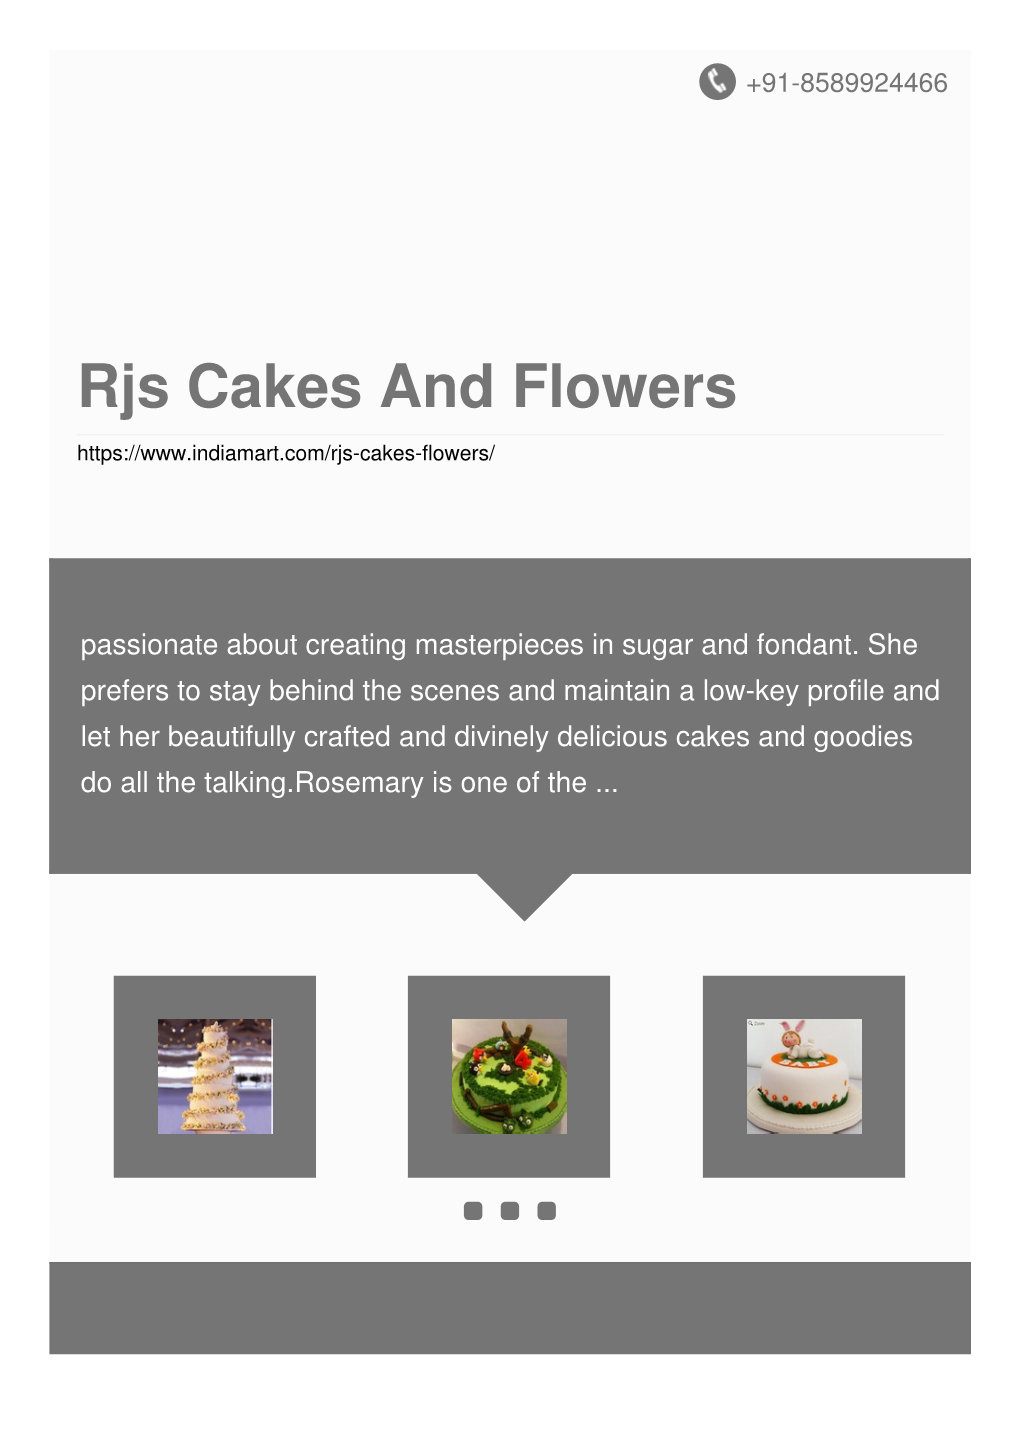 Rjs Cakes and Flowers